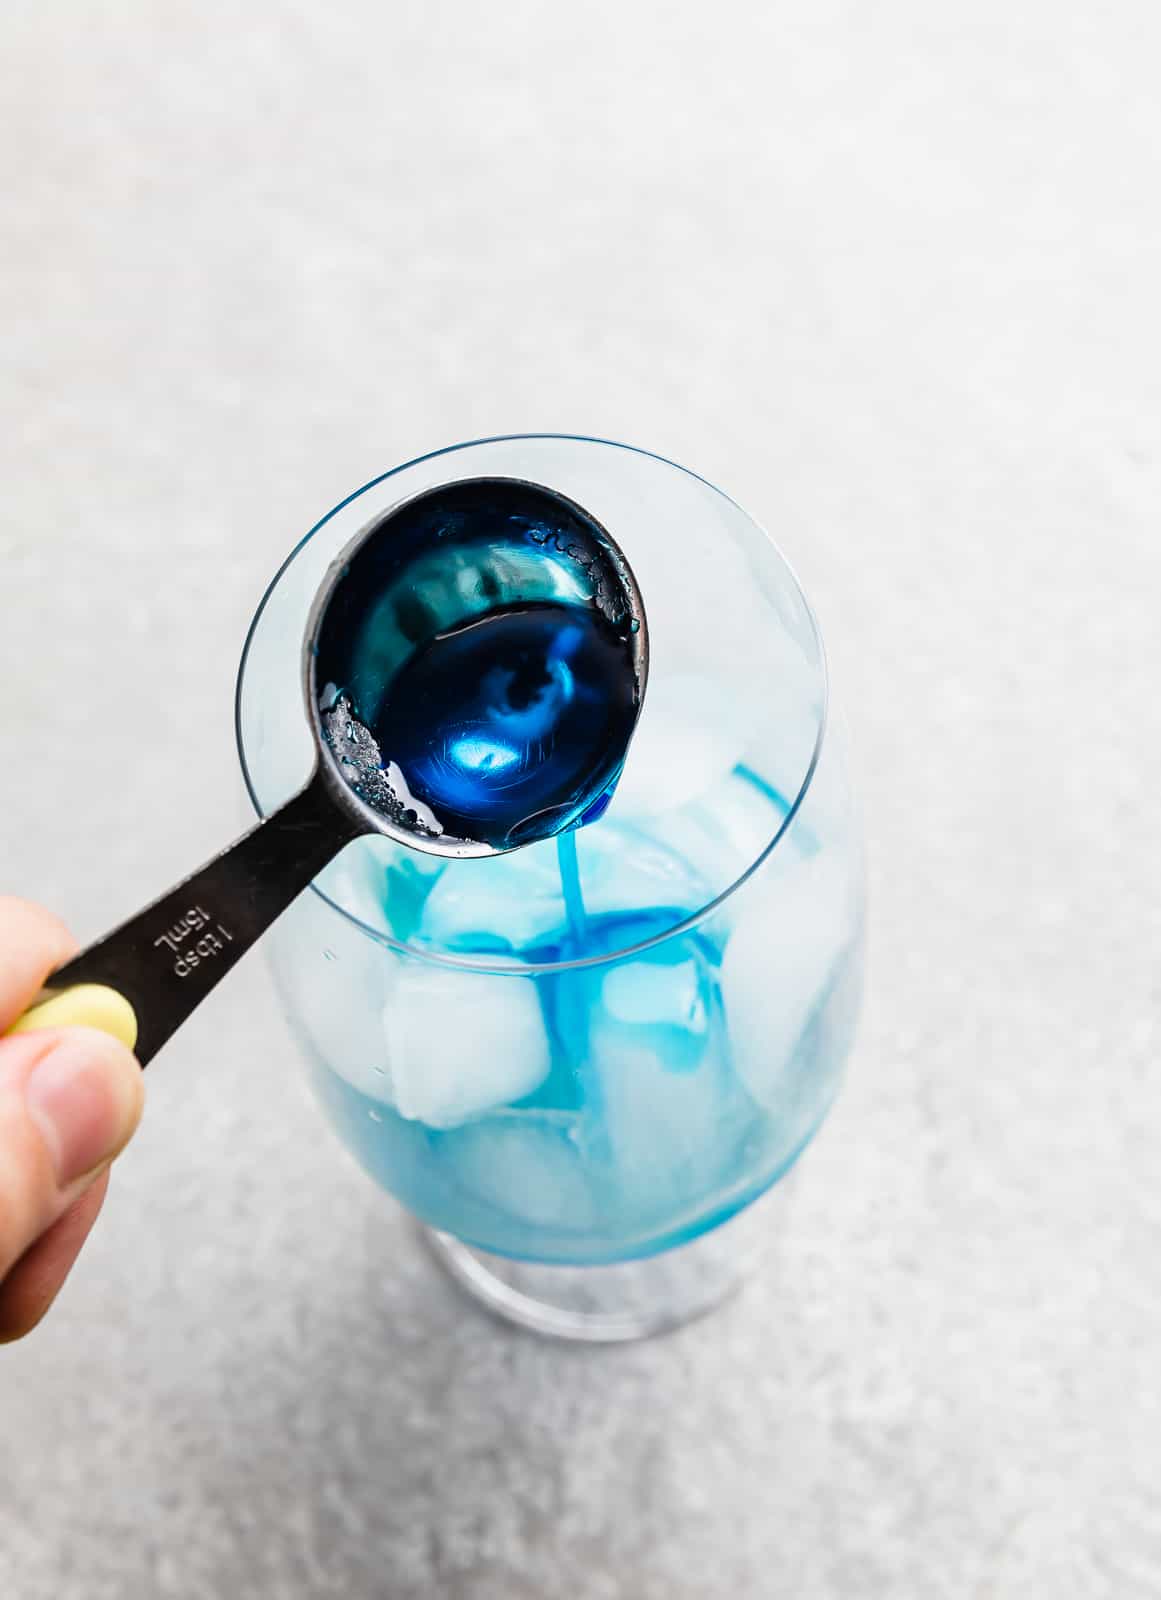 A tablespoon full of blue curaçao syrup being poured into a glass cup.